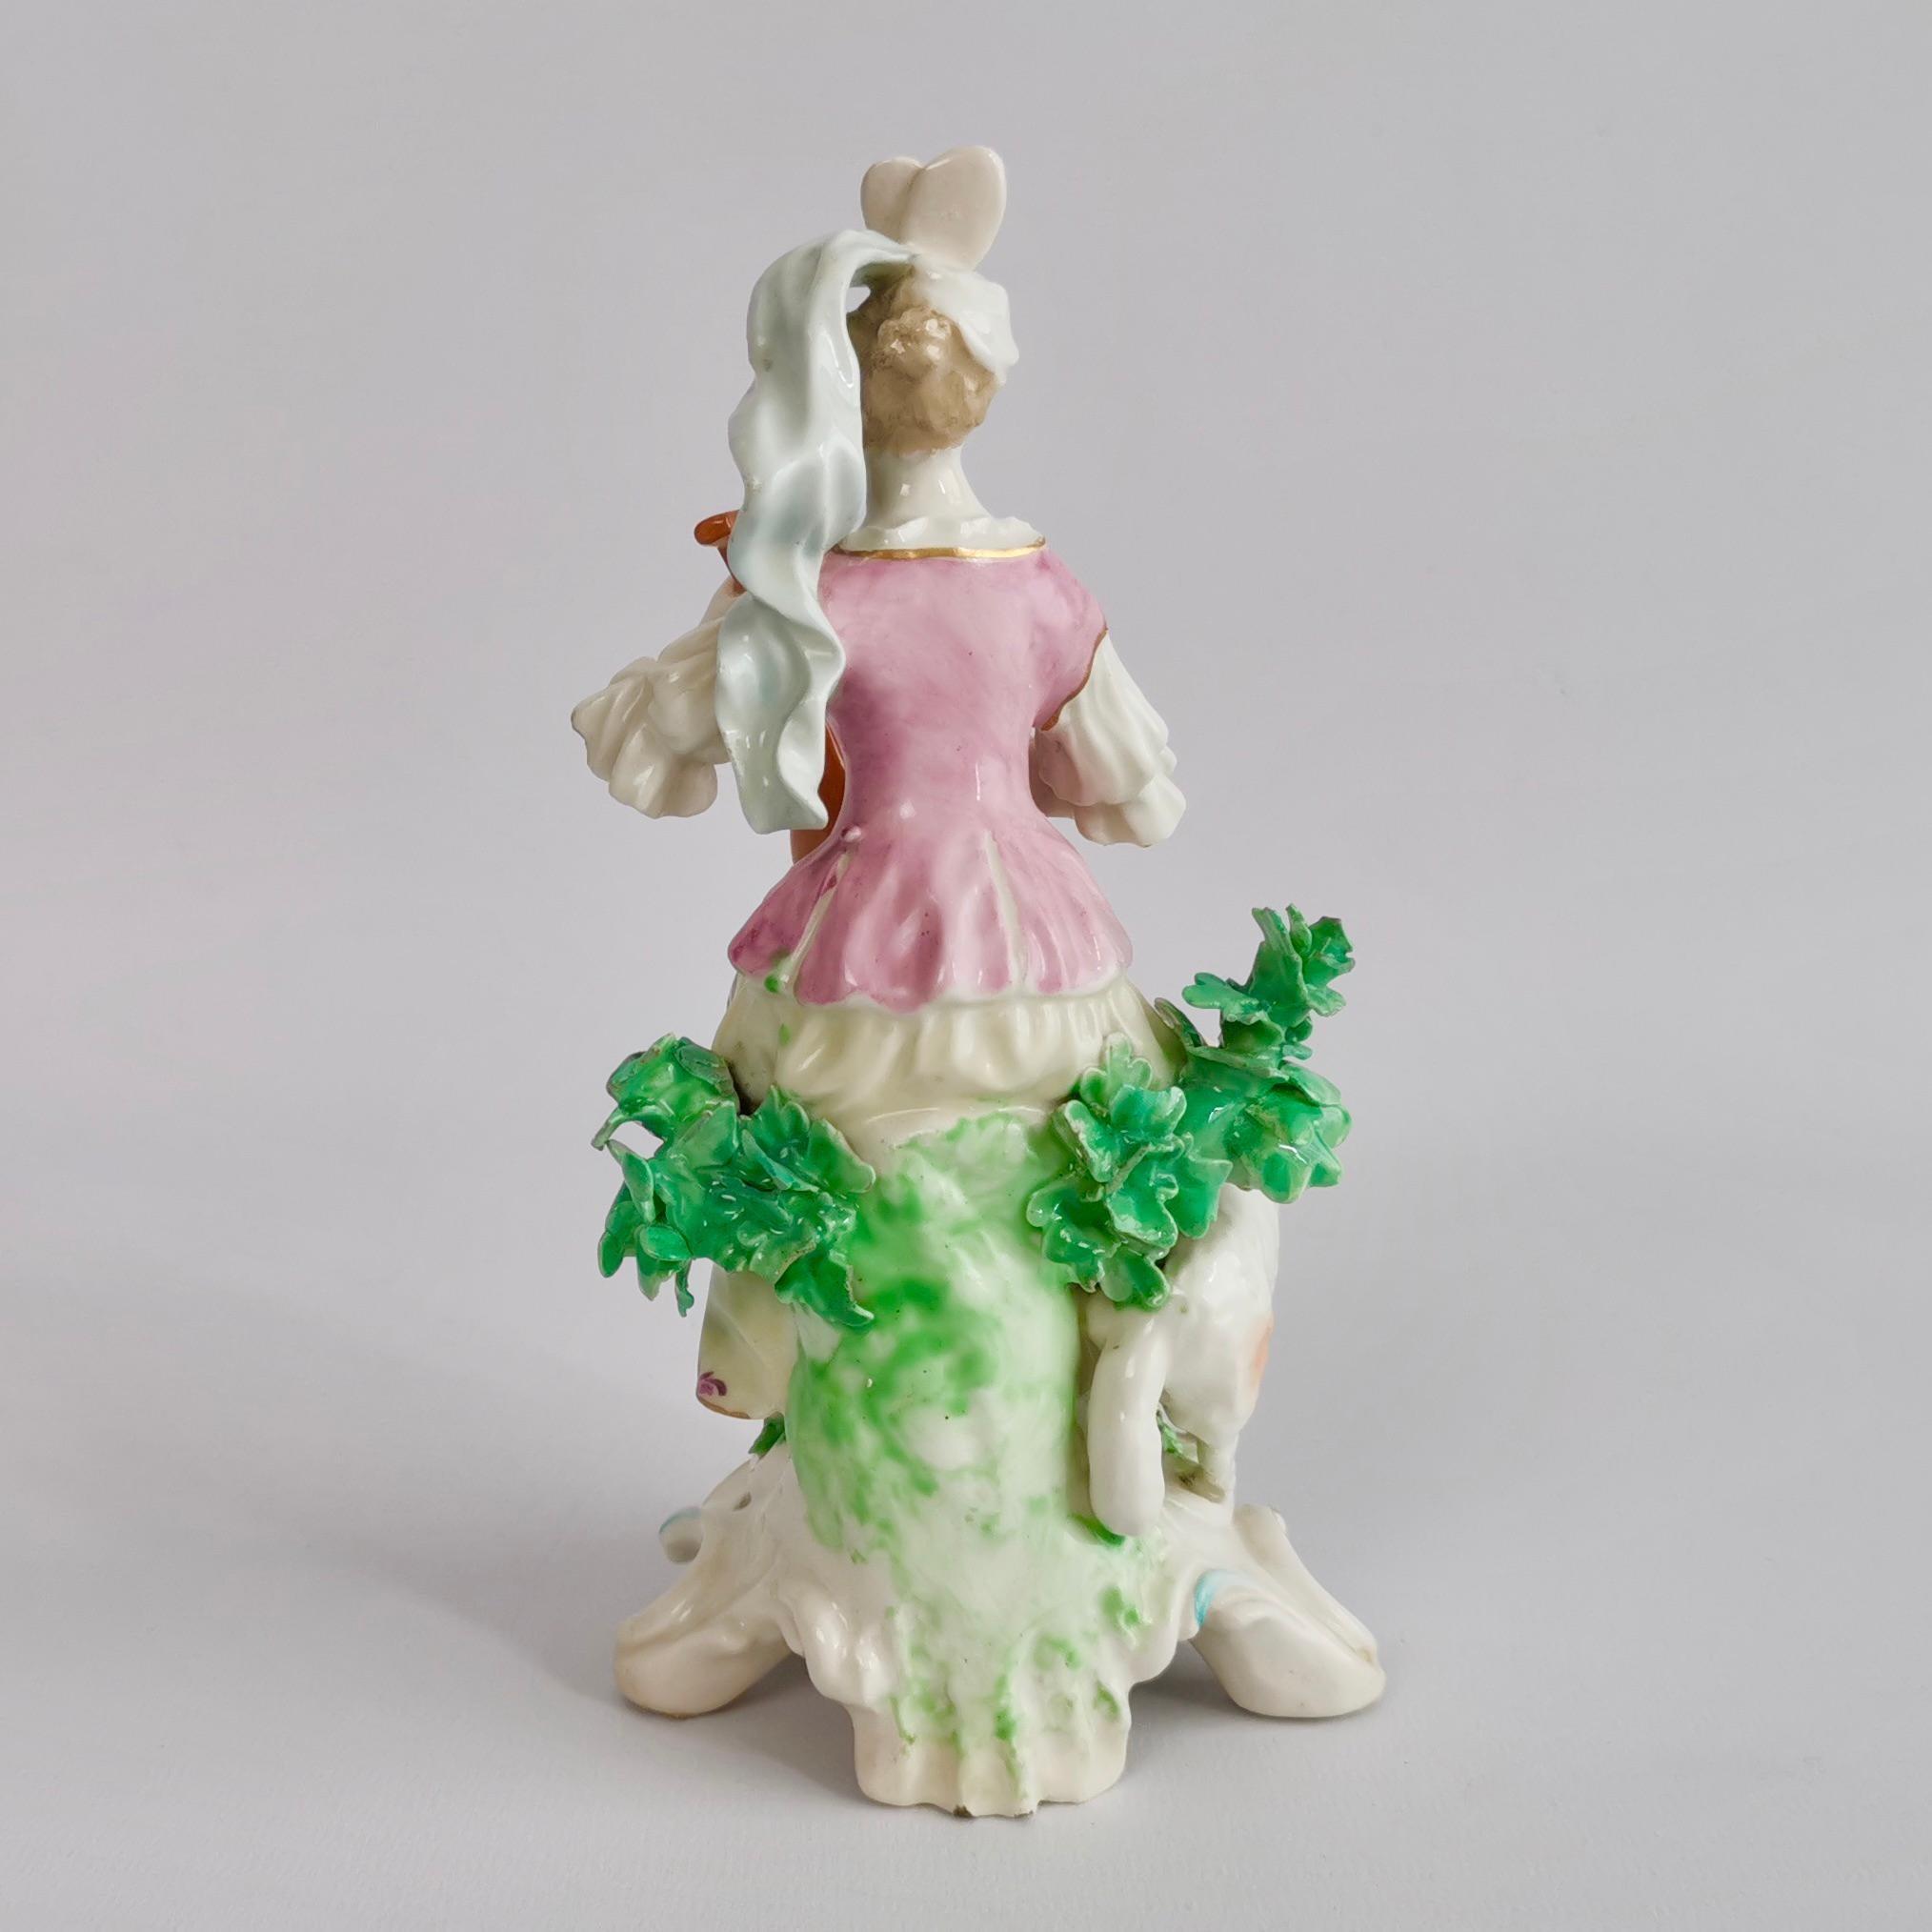 Rococo Chelsea-Derby Porcelain Figure of Lady with Lute, 18th Century, circa 1770